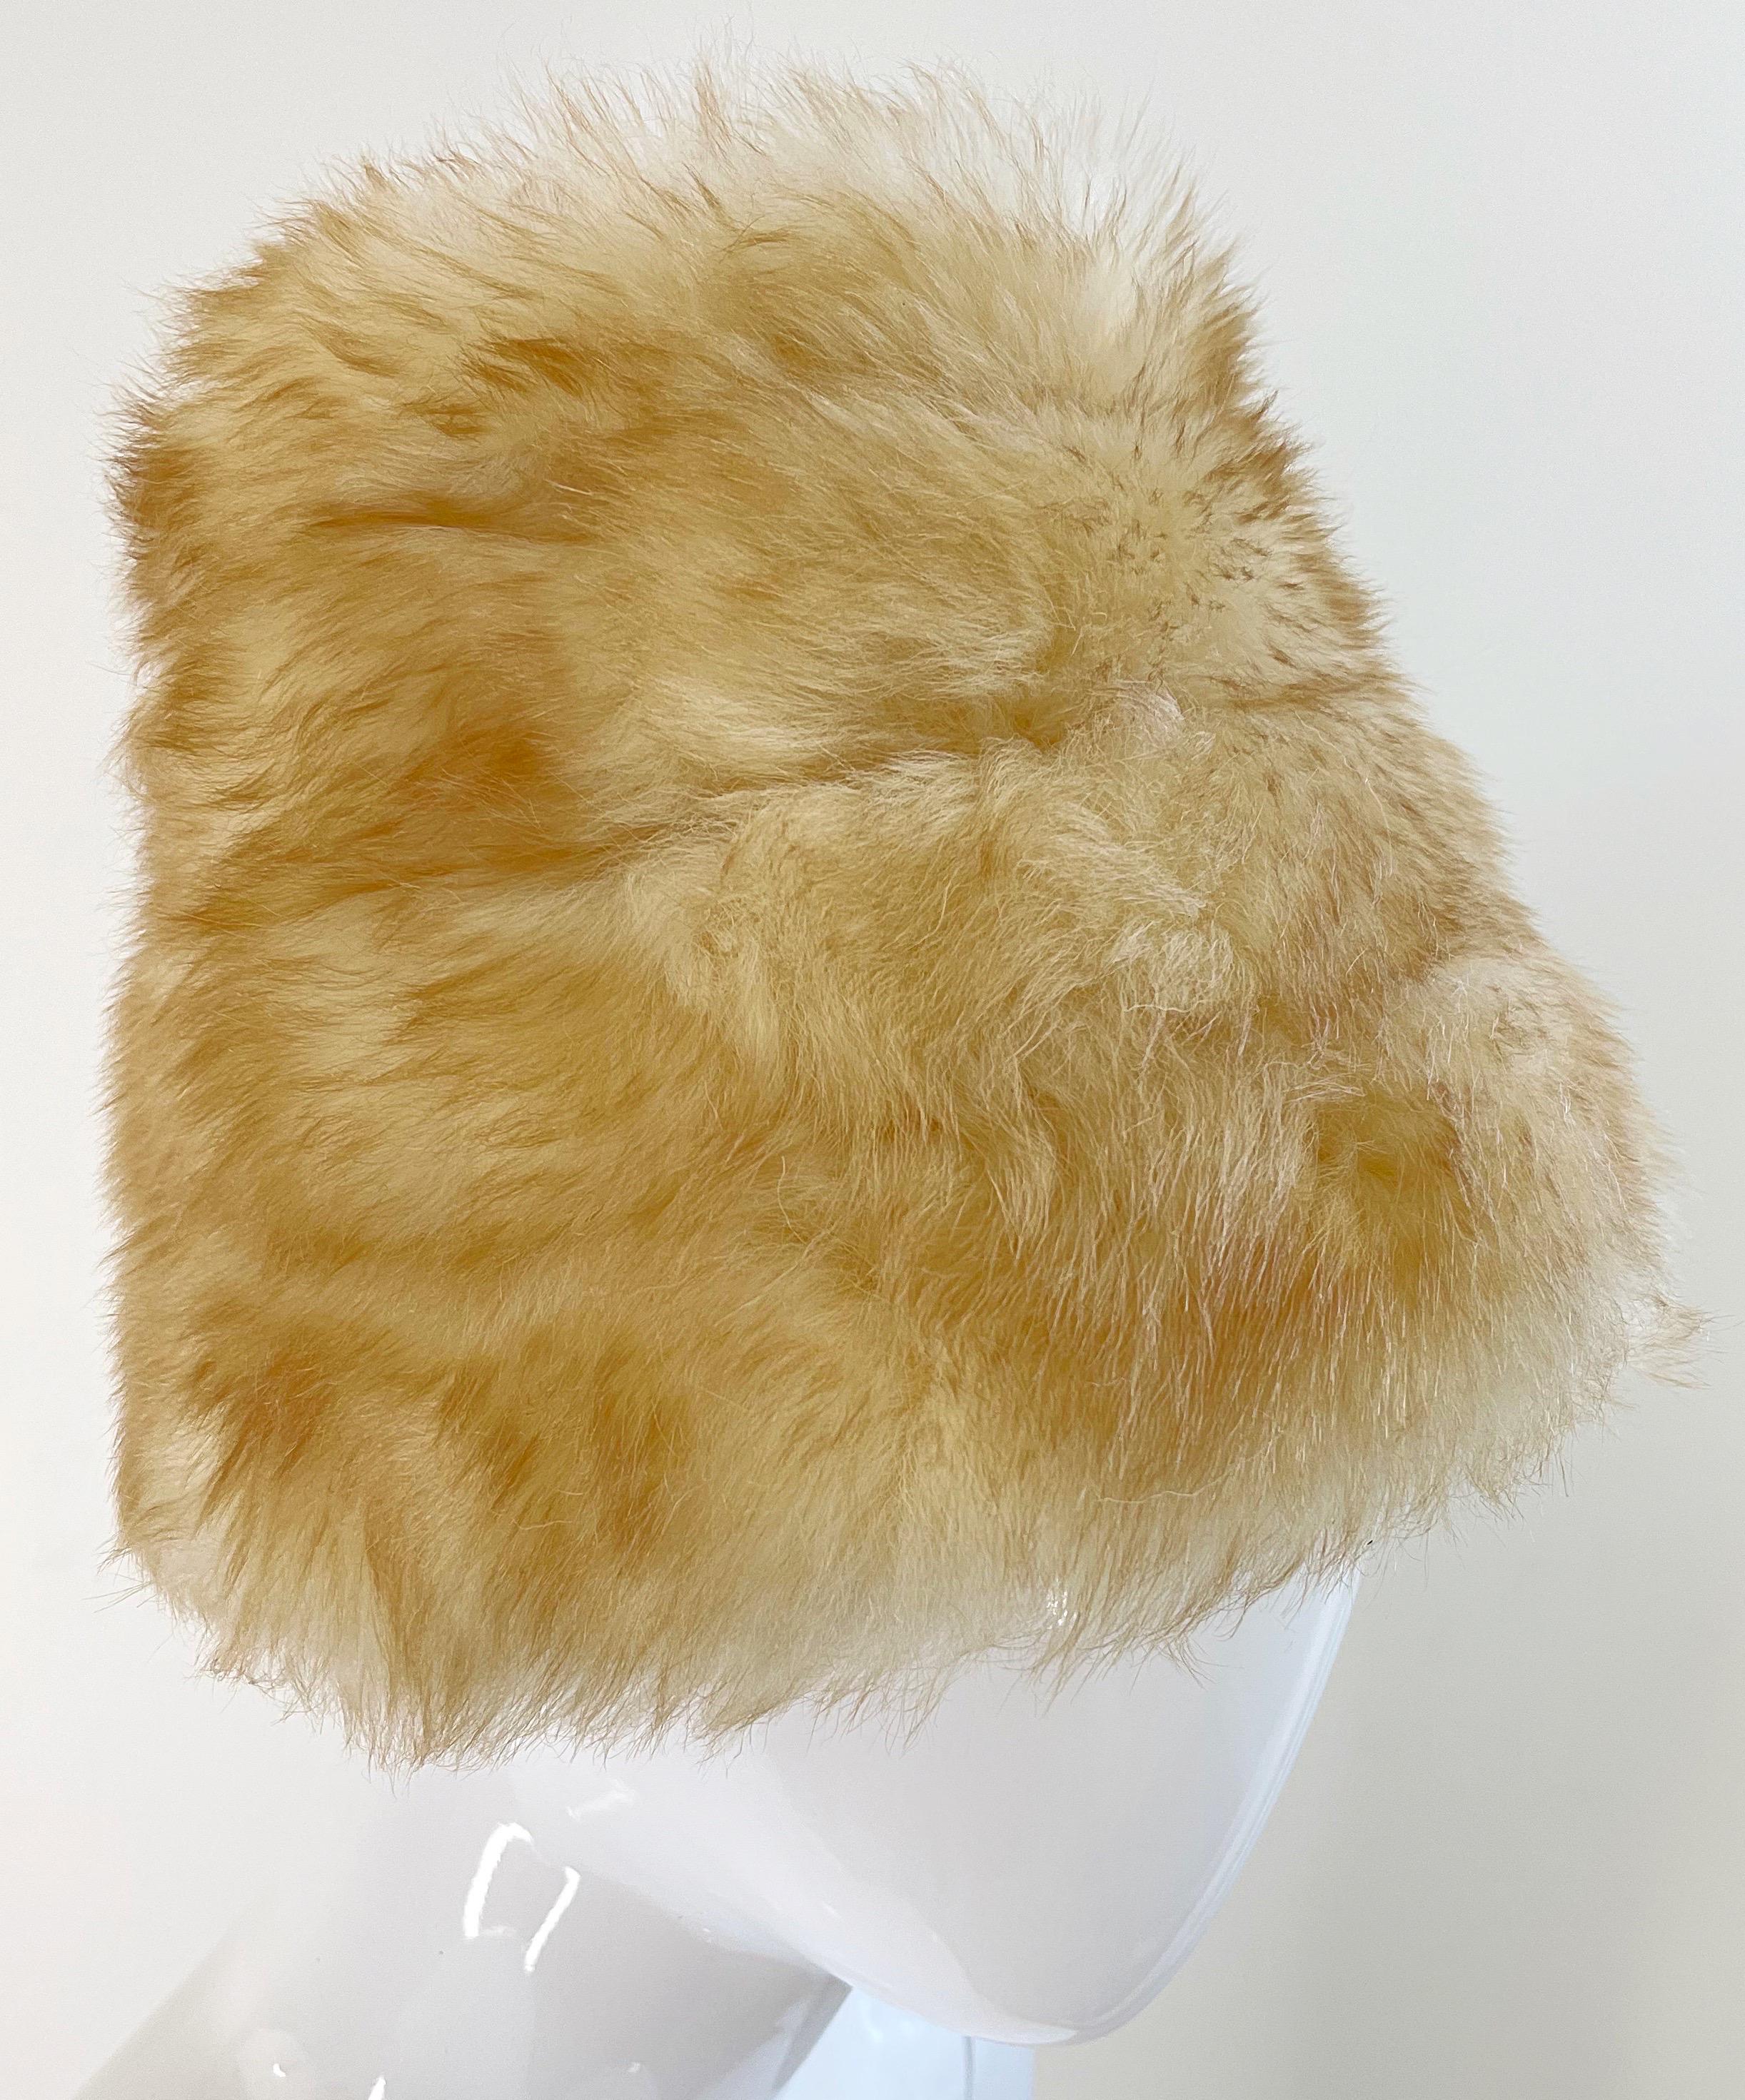 Yves Saint Laurent Fall 1976 Russian Collection Shearling Honey Tan Fur Hat 70s 6